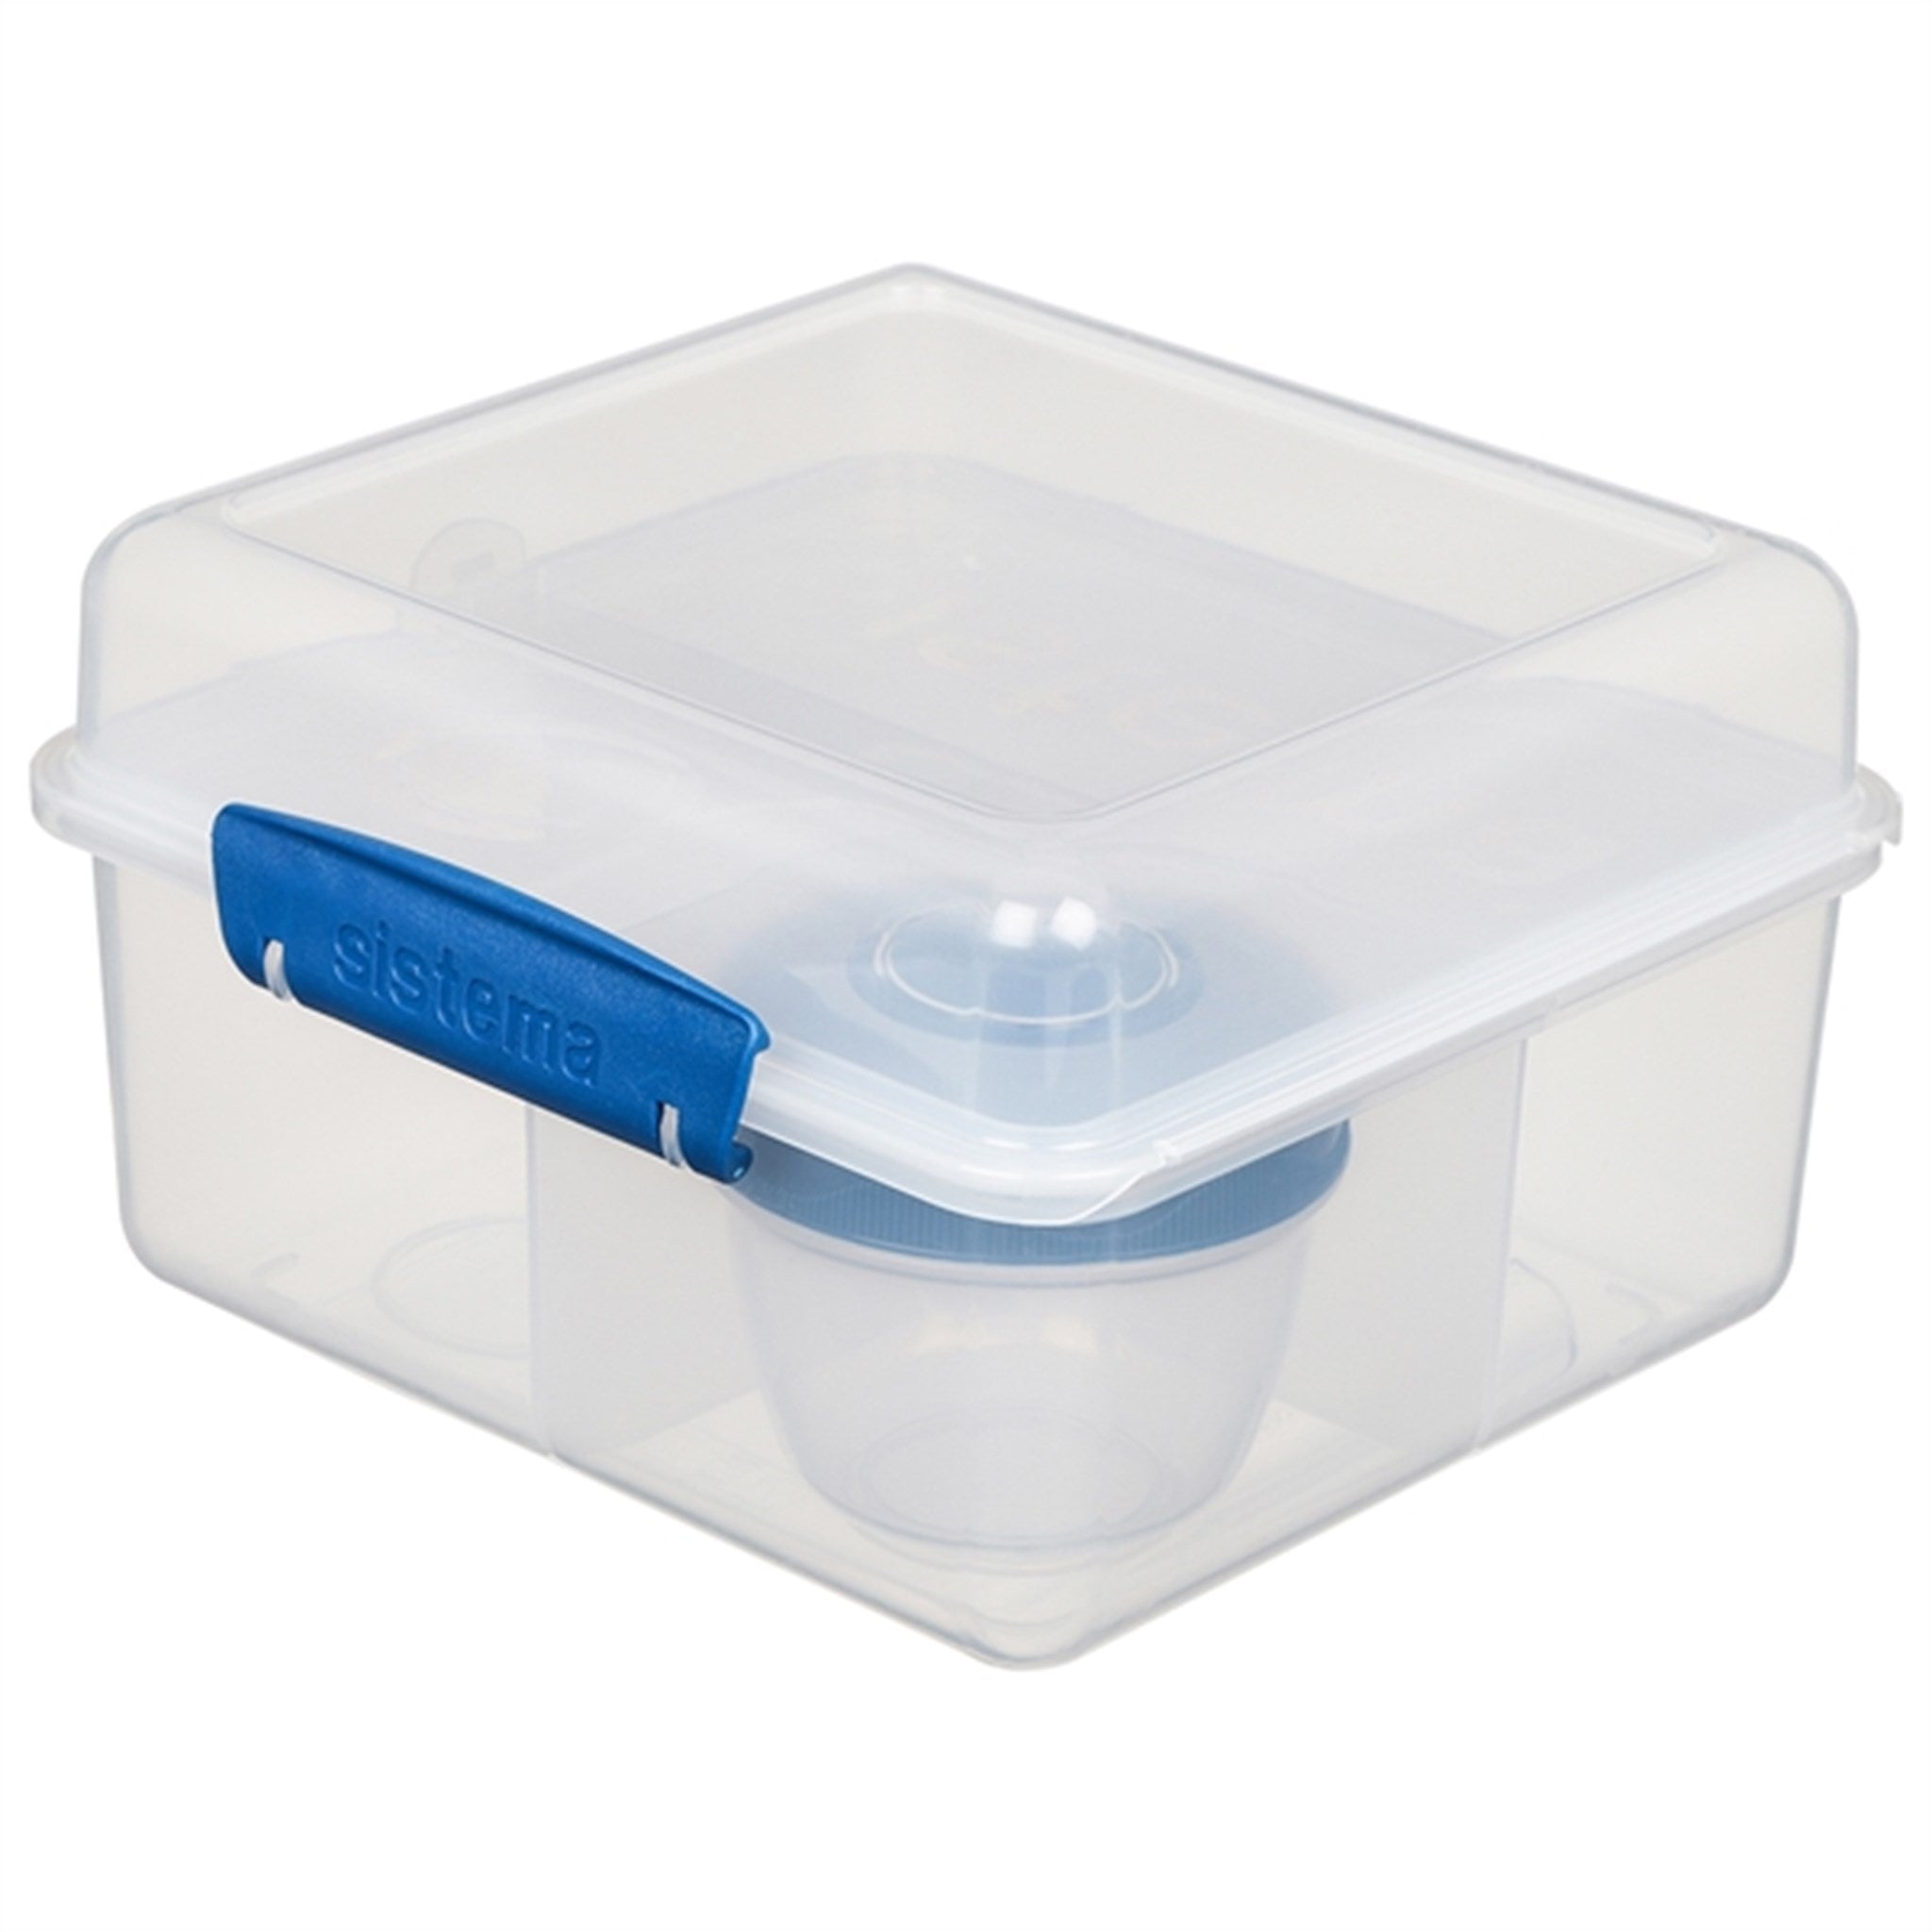 Sistema To Go Lunch Cube Max Lunchlåda 2 L Ocean Blue